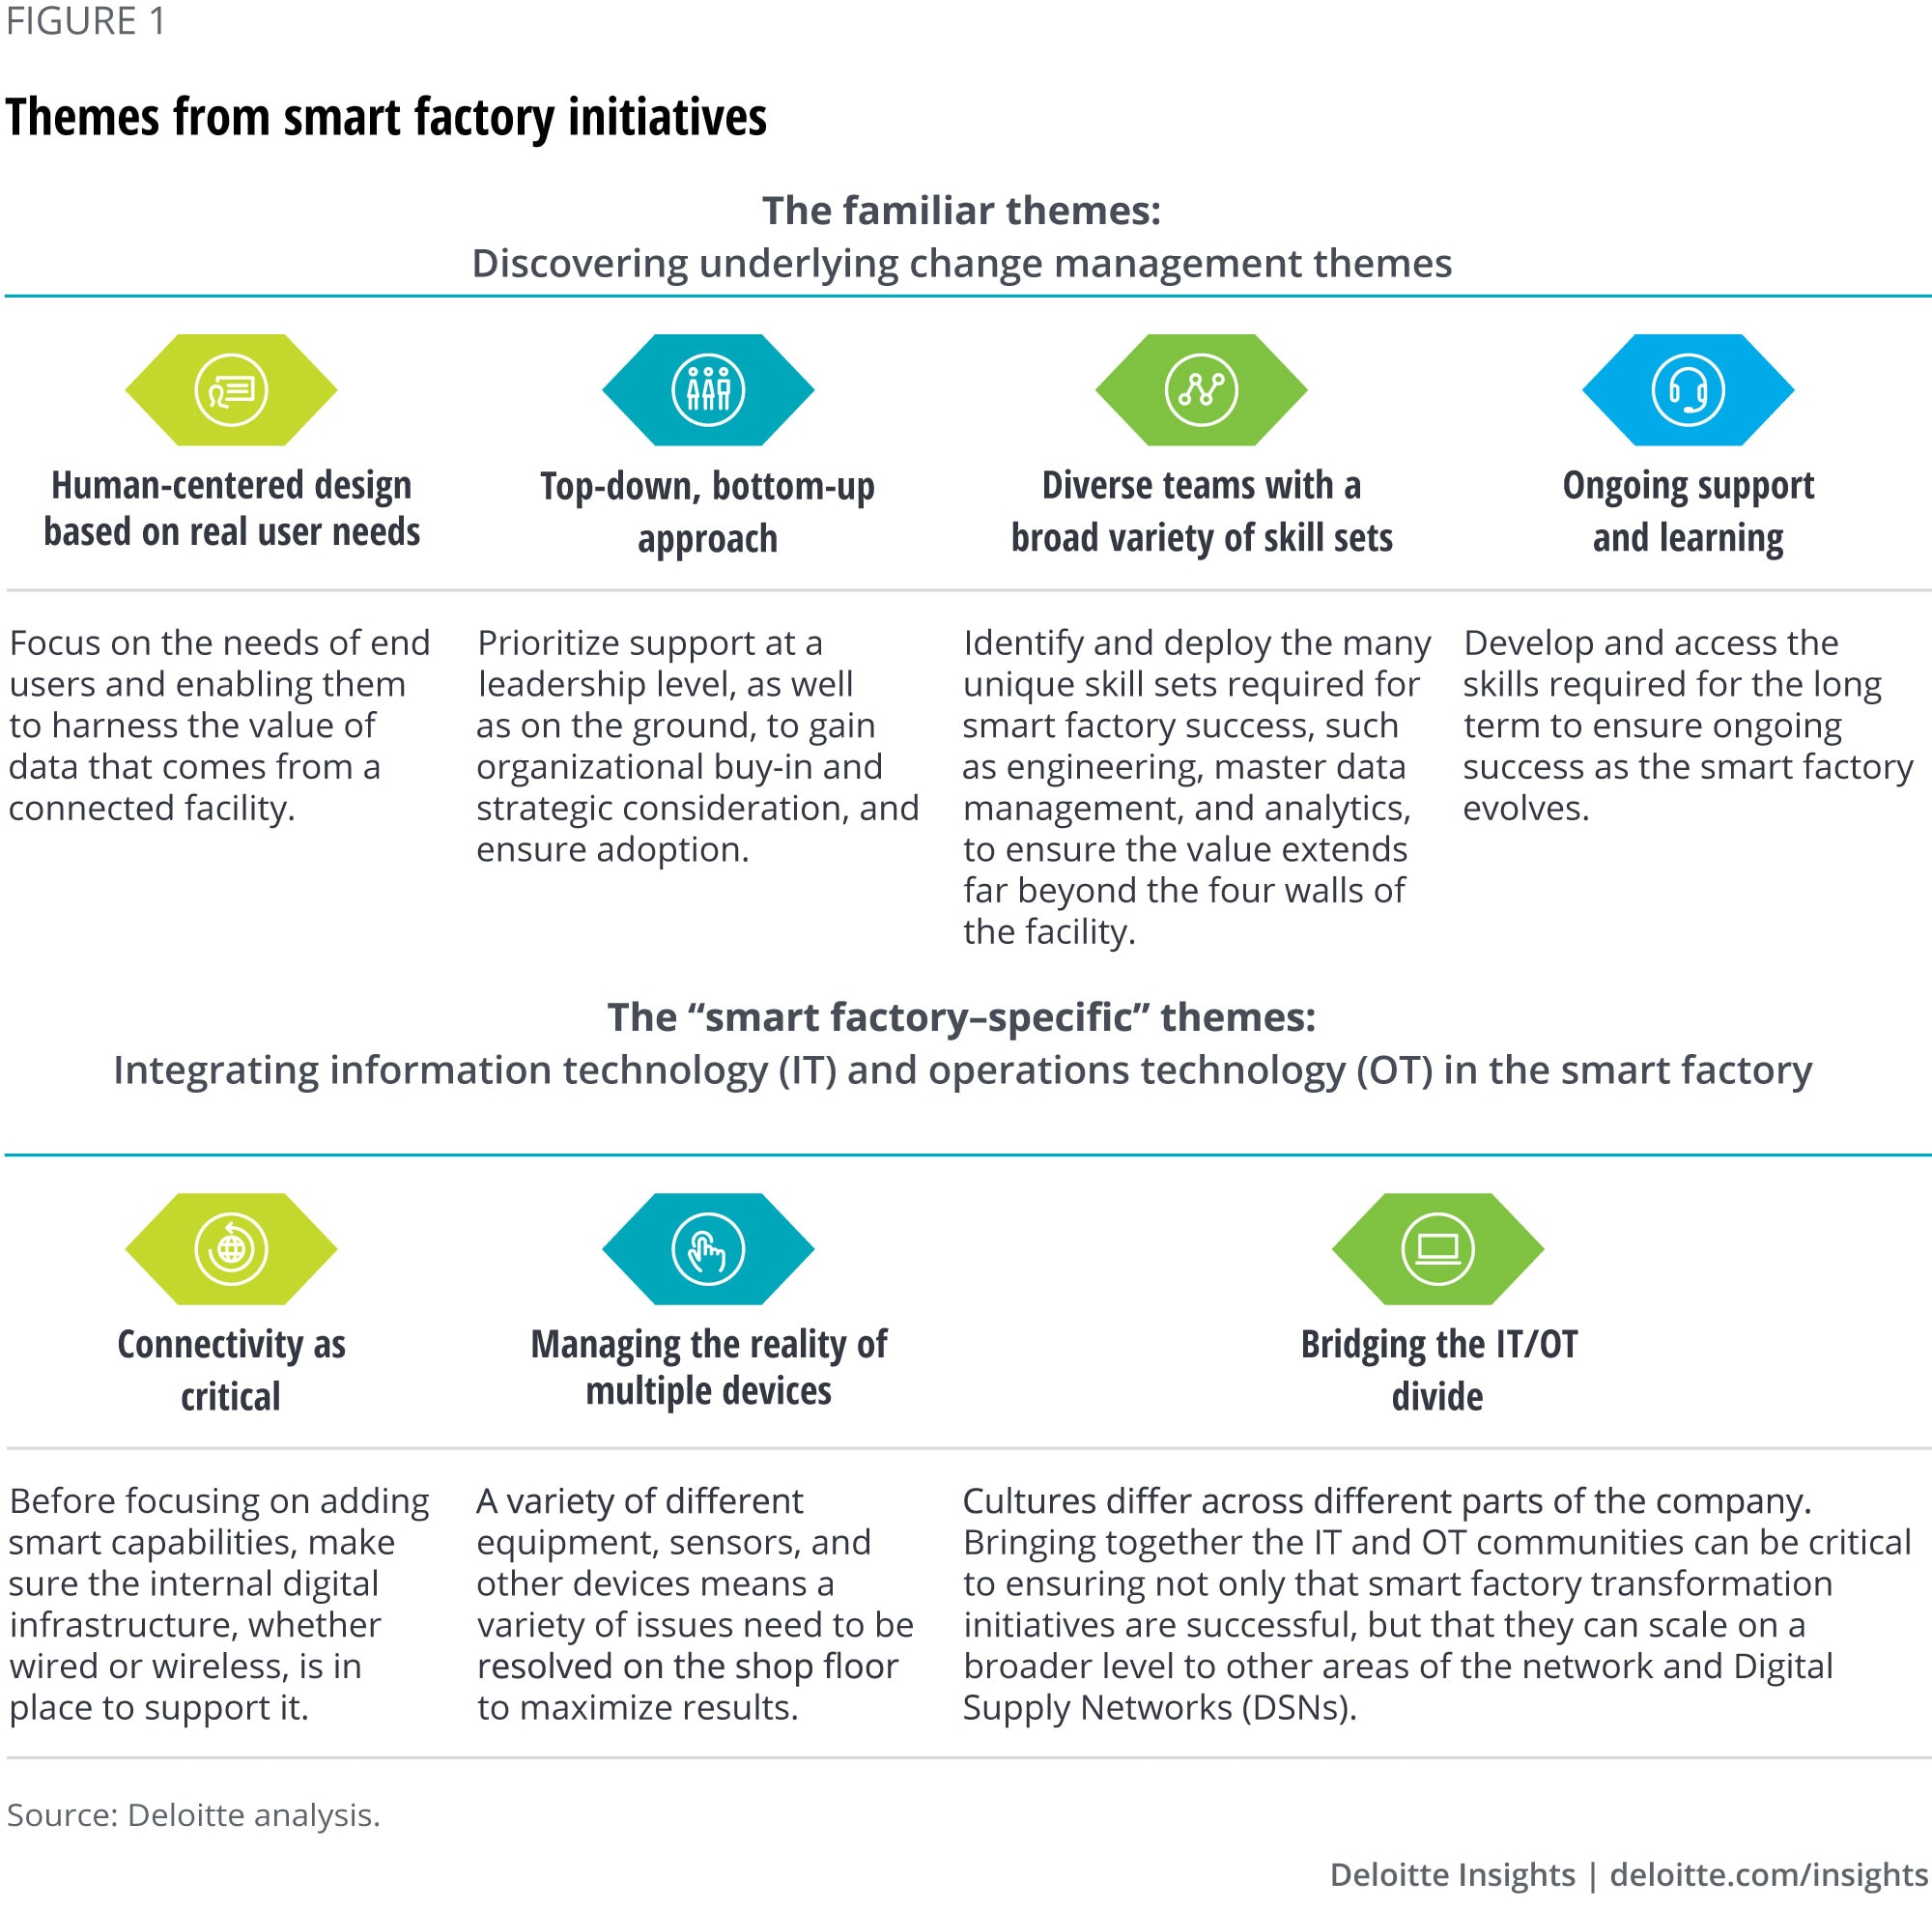 Themes from smart factory initiatives